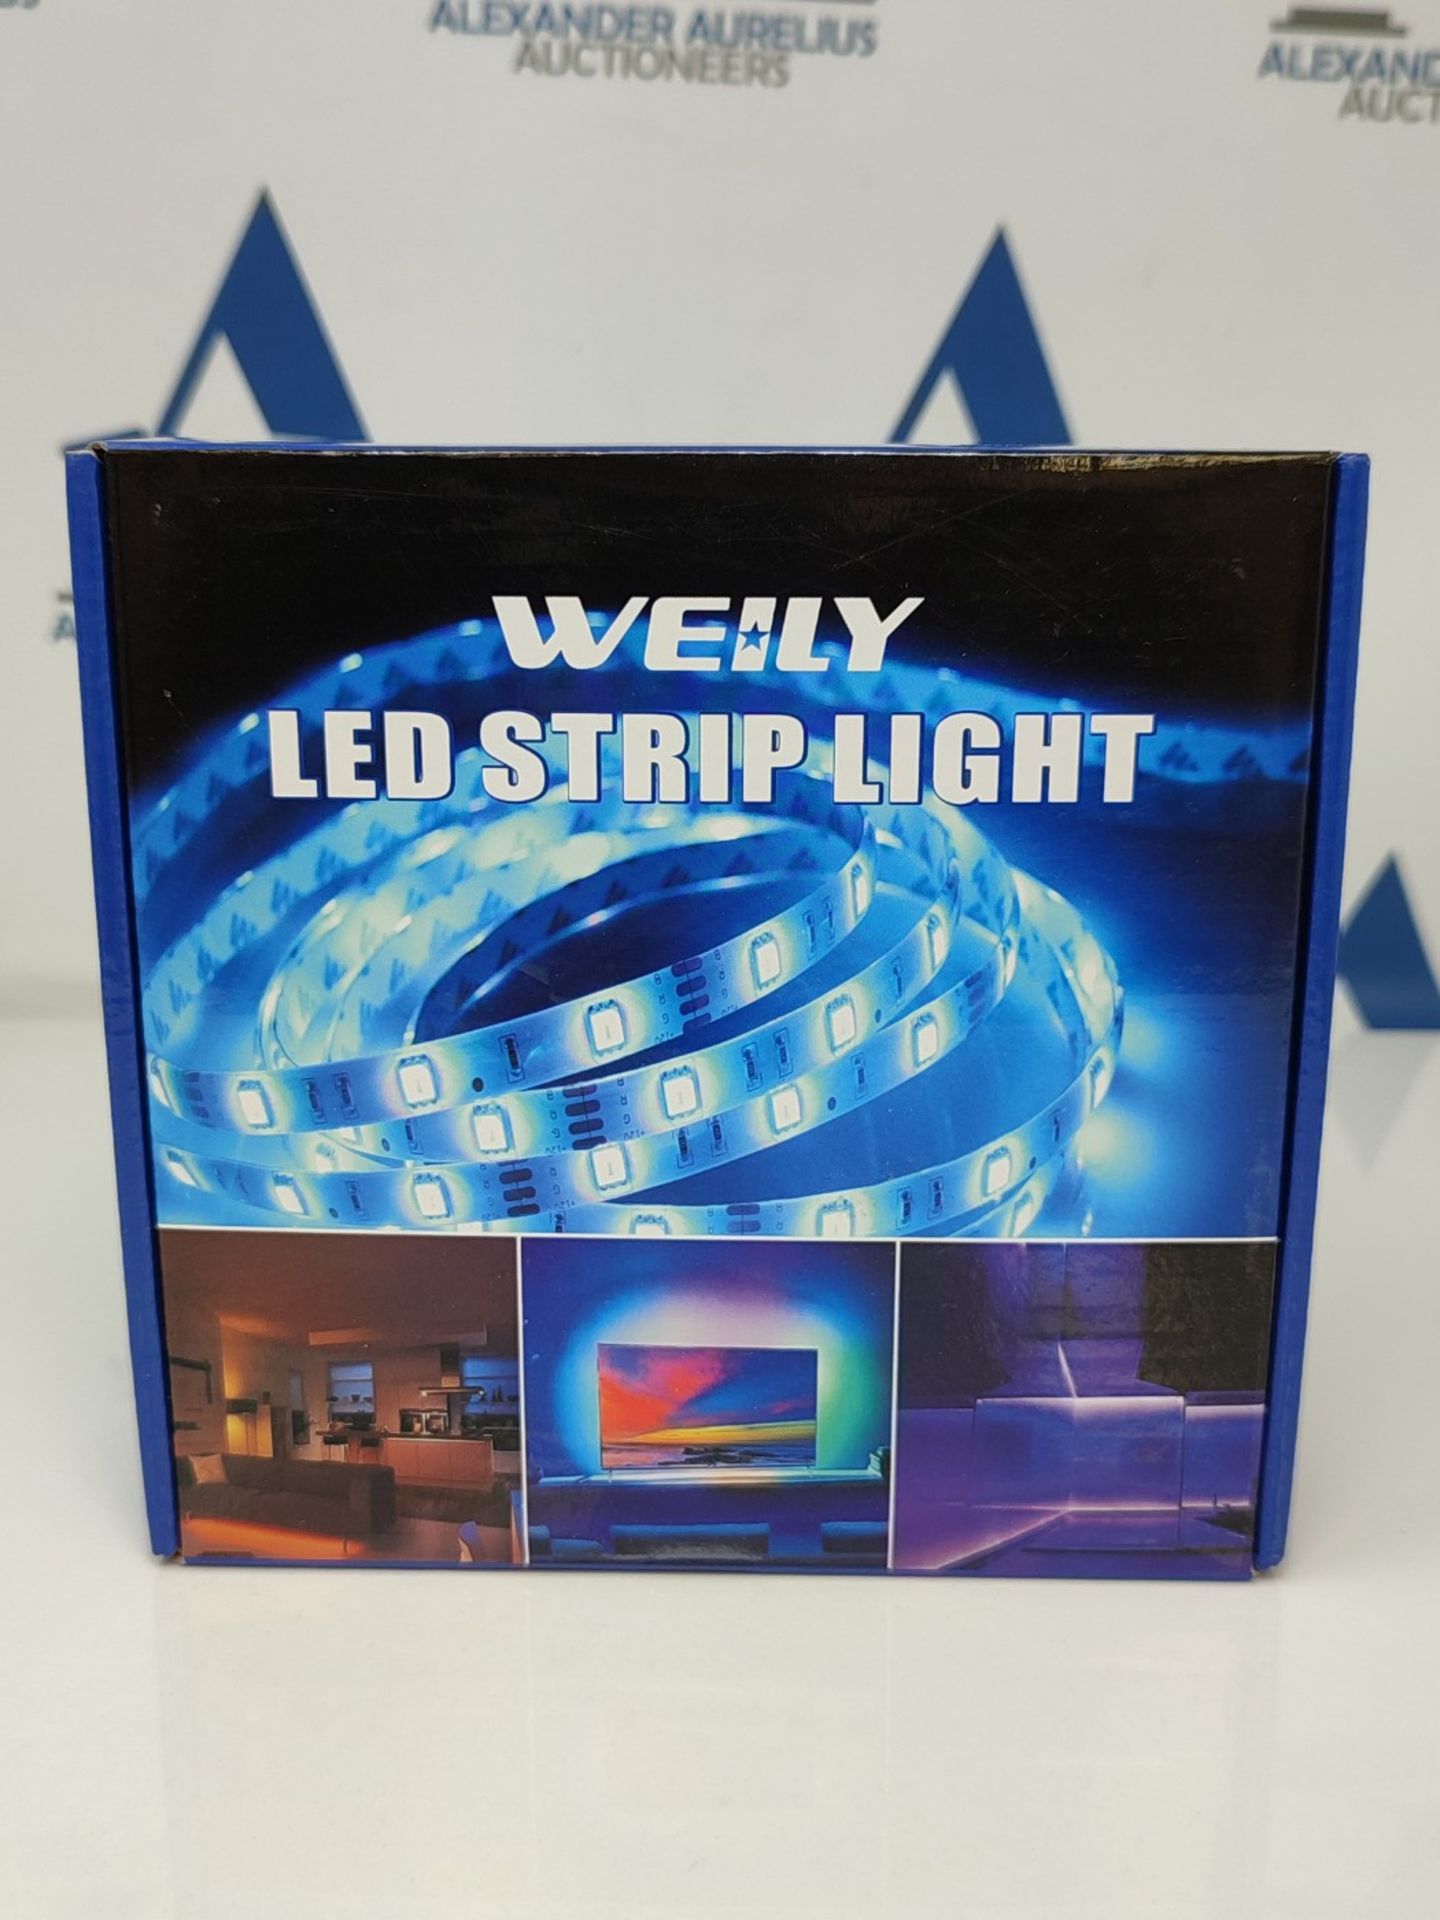 15M LED Strips, WEILY 15M RGB Colorful LED Room Lights Remote Control Music LED Strips - Image 5 of 6